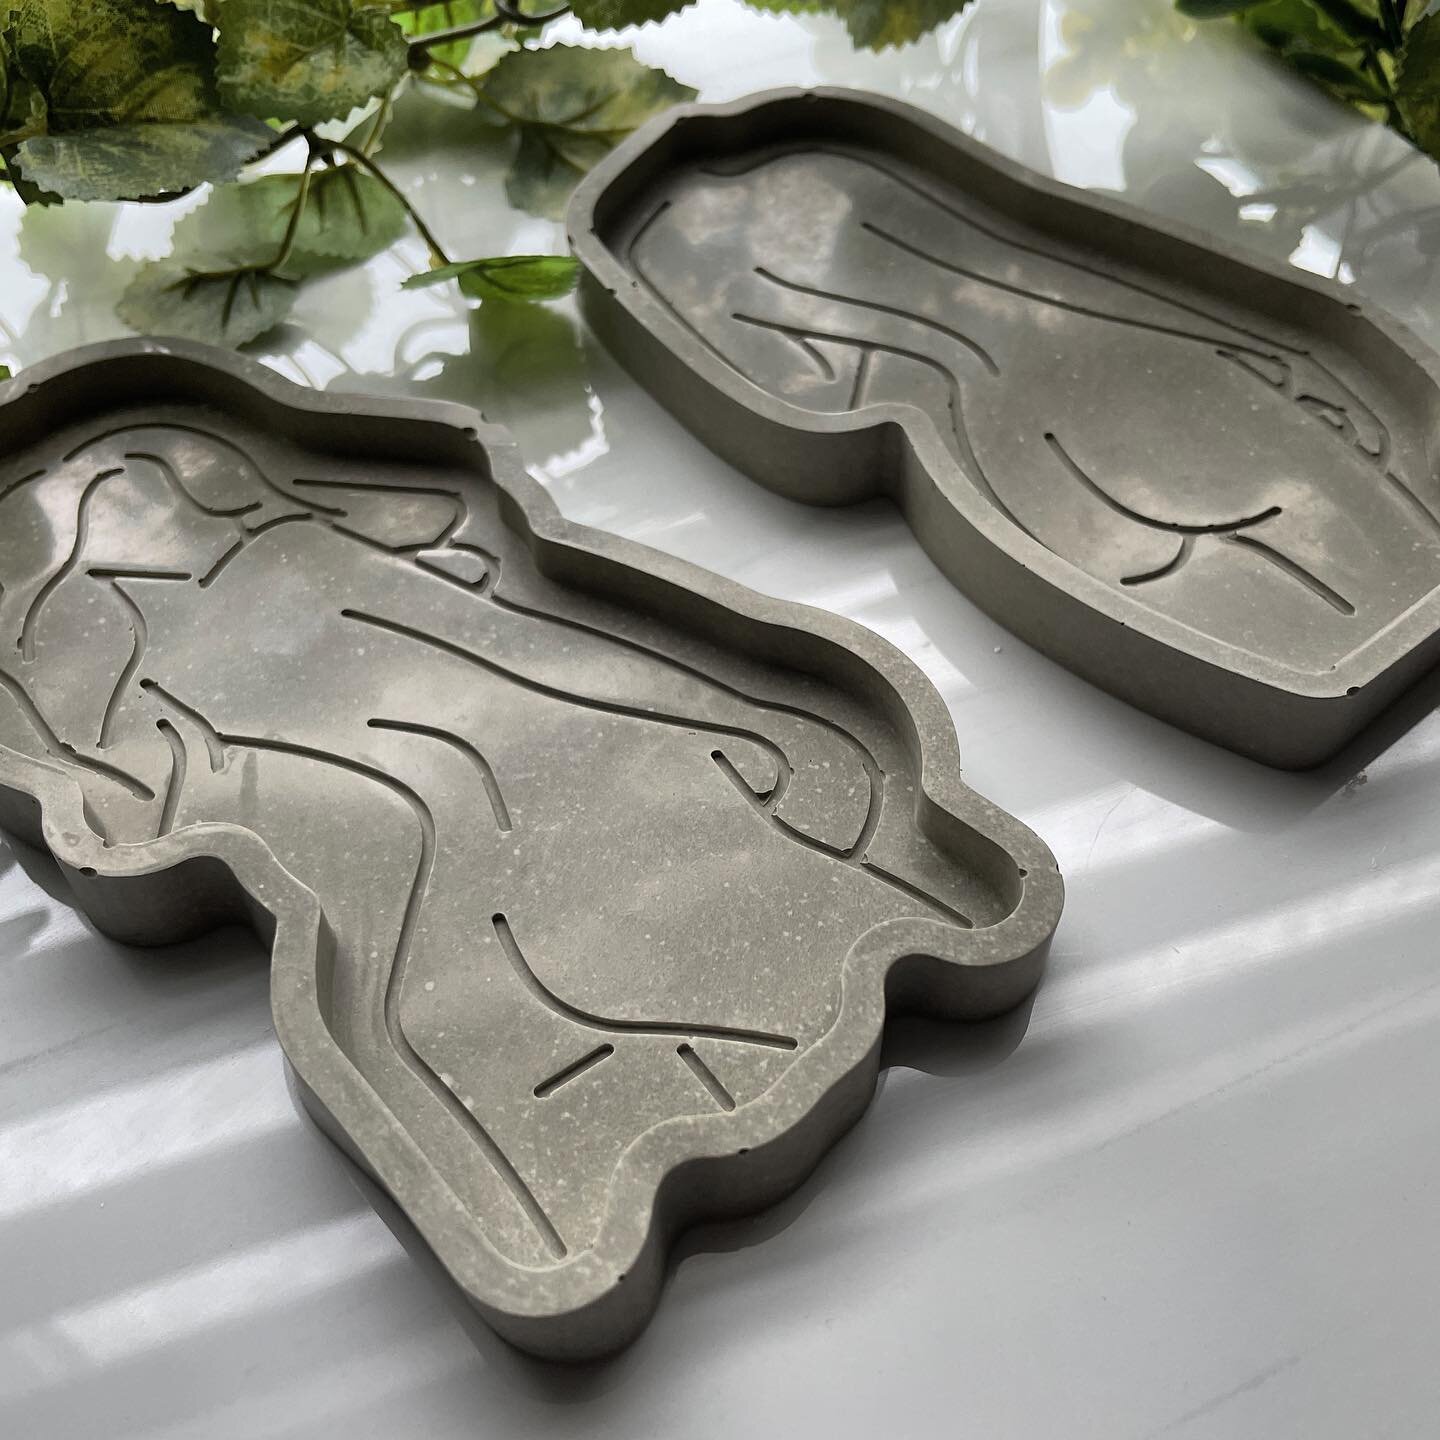 ⁣Available individually or as a set of 2.⠀
Body Jewelry Tray ✨⠀
⠀
Get your trinket tray today!⠀
⠀
⠀
⠀
⠀
⠀
⠀
⠀
⠀
⠀
⠀
⠀
⠀
⠀
#Concrete  #styleinspiration  #smallbusiness #handmade #concretedecor  #madeincanada #concretediy #diyhomedecor #concretedesign 